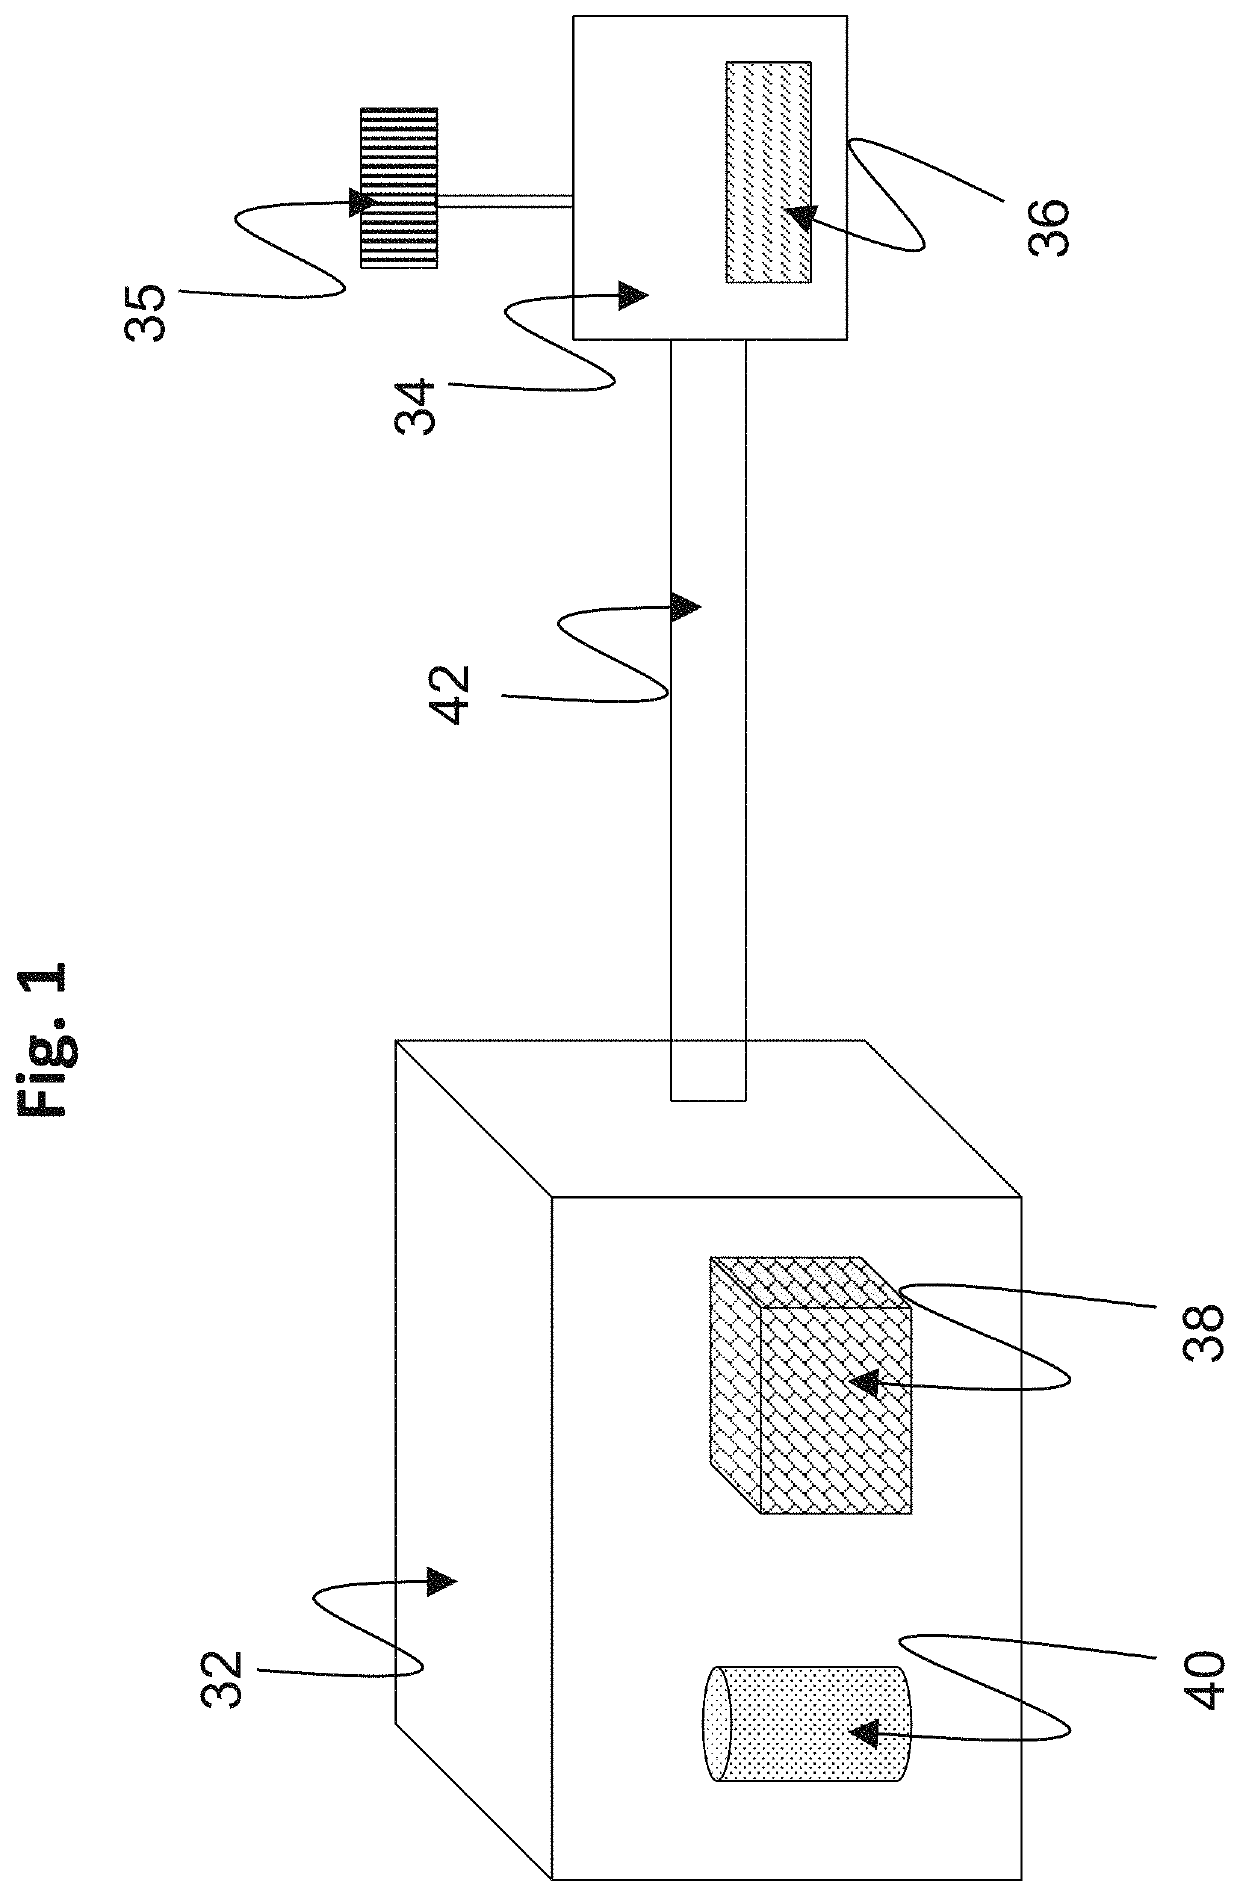 Molecular separation by diffusion using an EWOD device